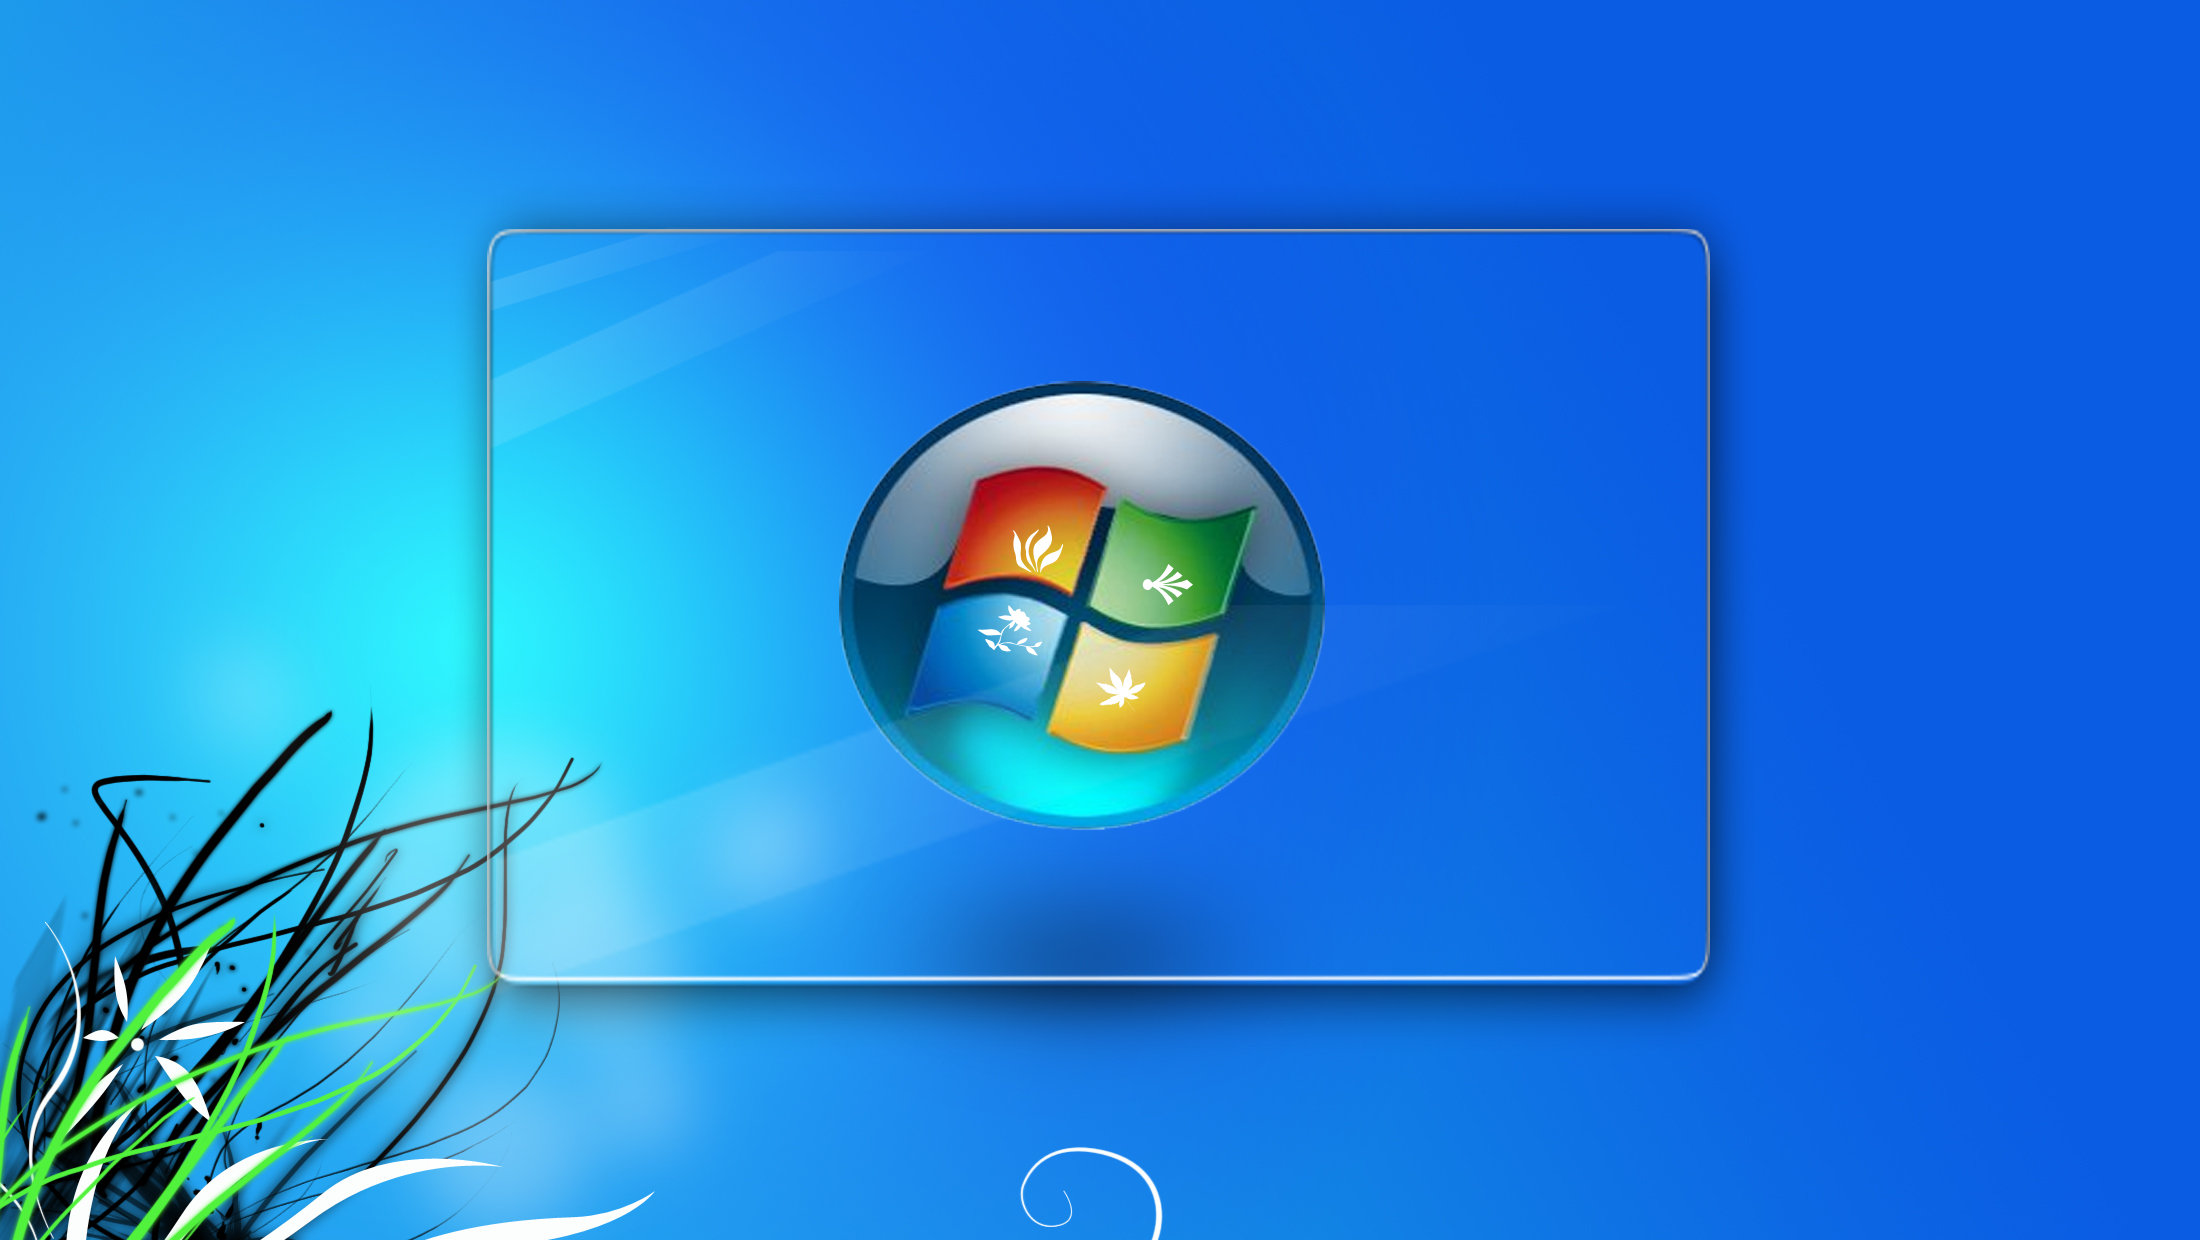 Windows Aero Orb Wallpaper By Willywill619